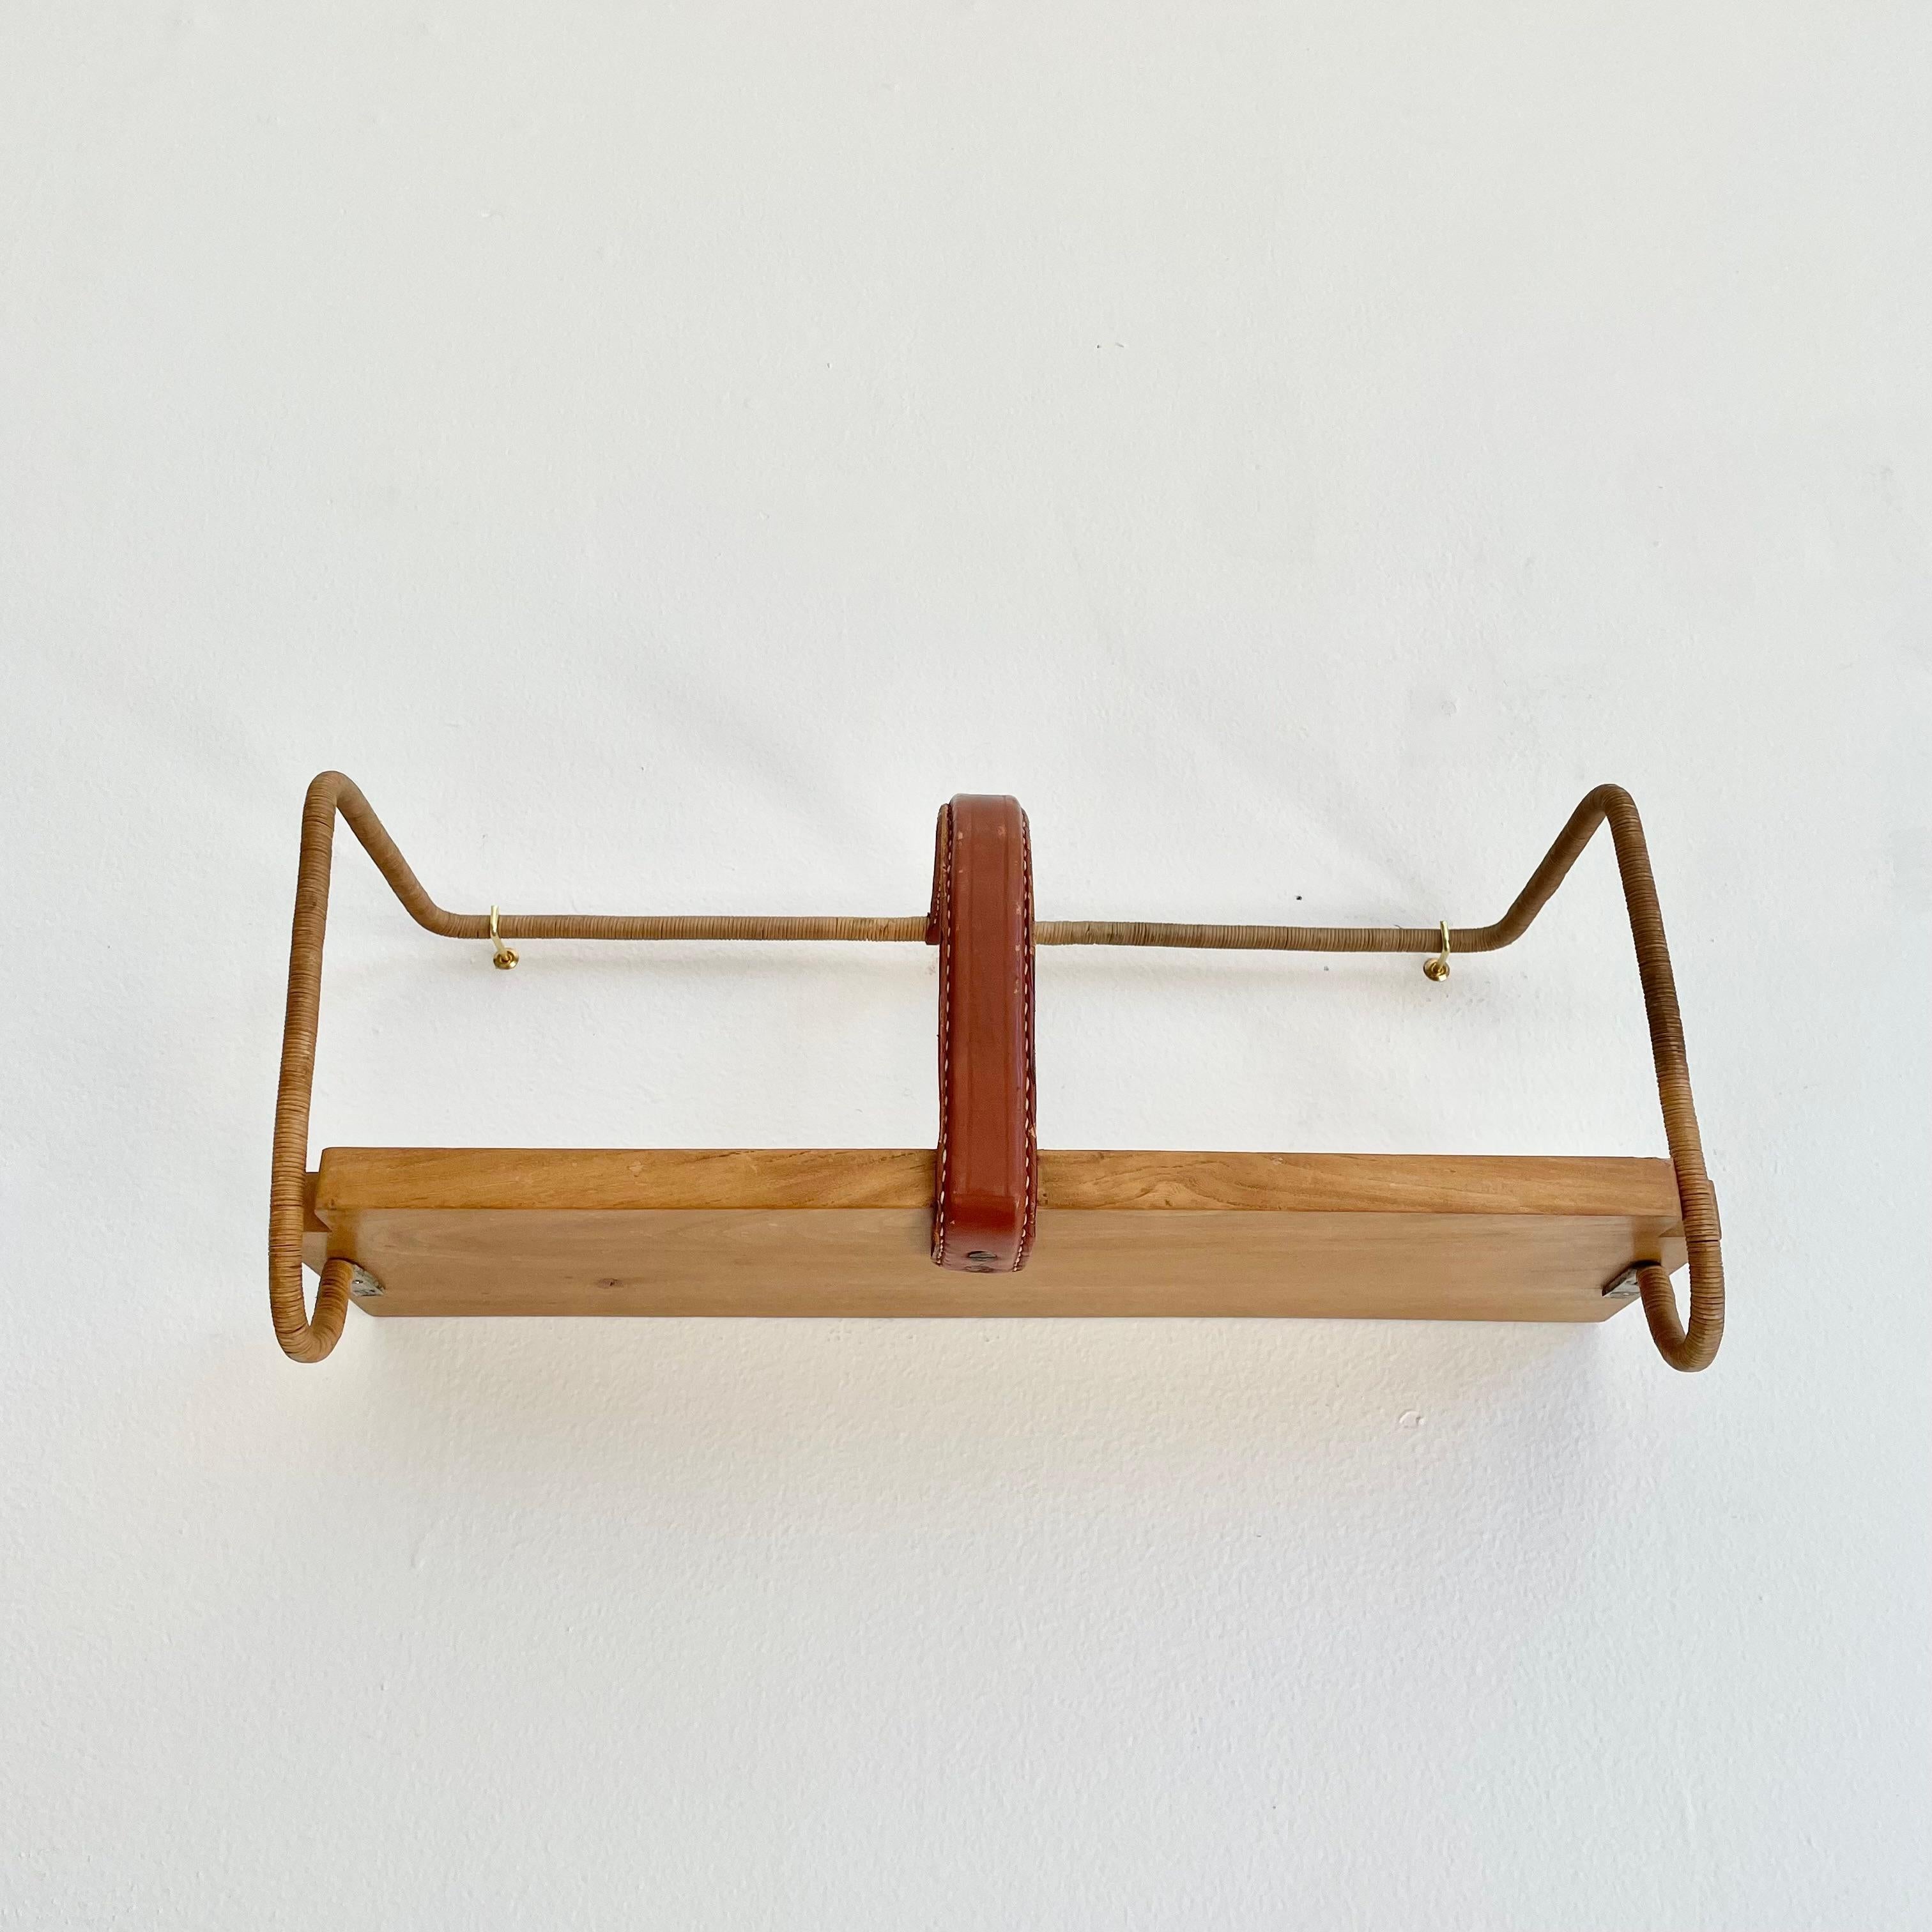 Jacques Adnet Leather, Wood and Twine Shelf, 1950s France For Sale 10